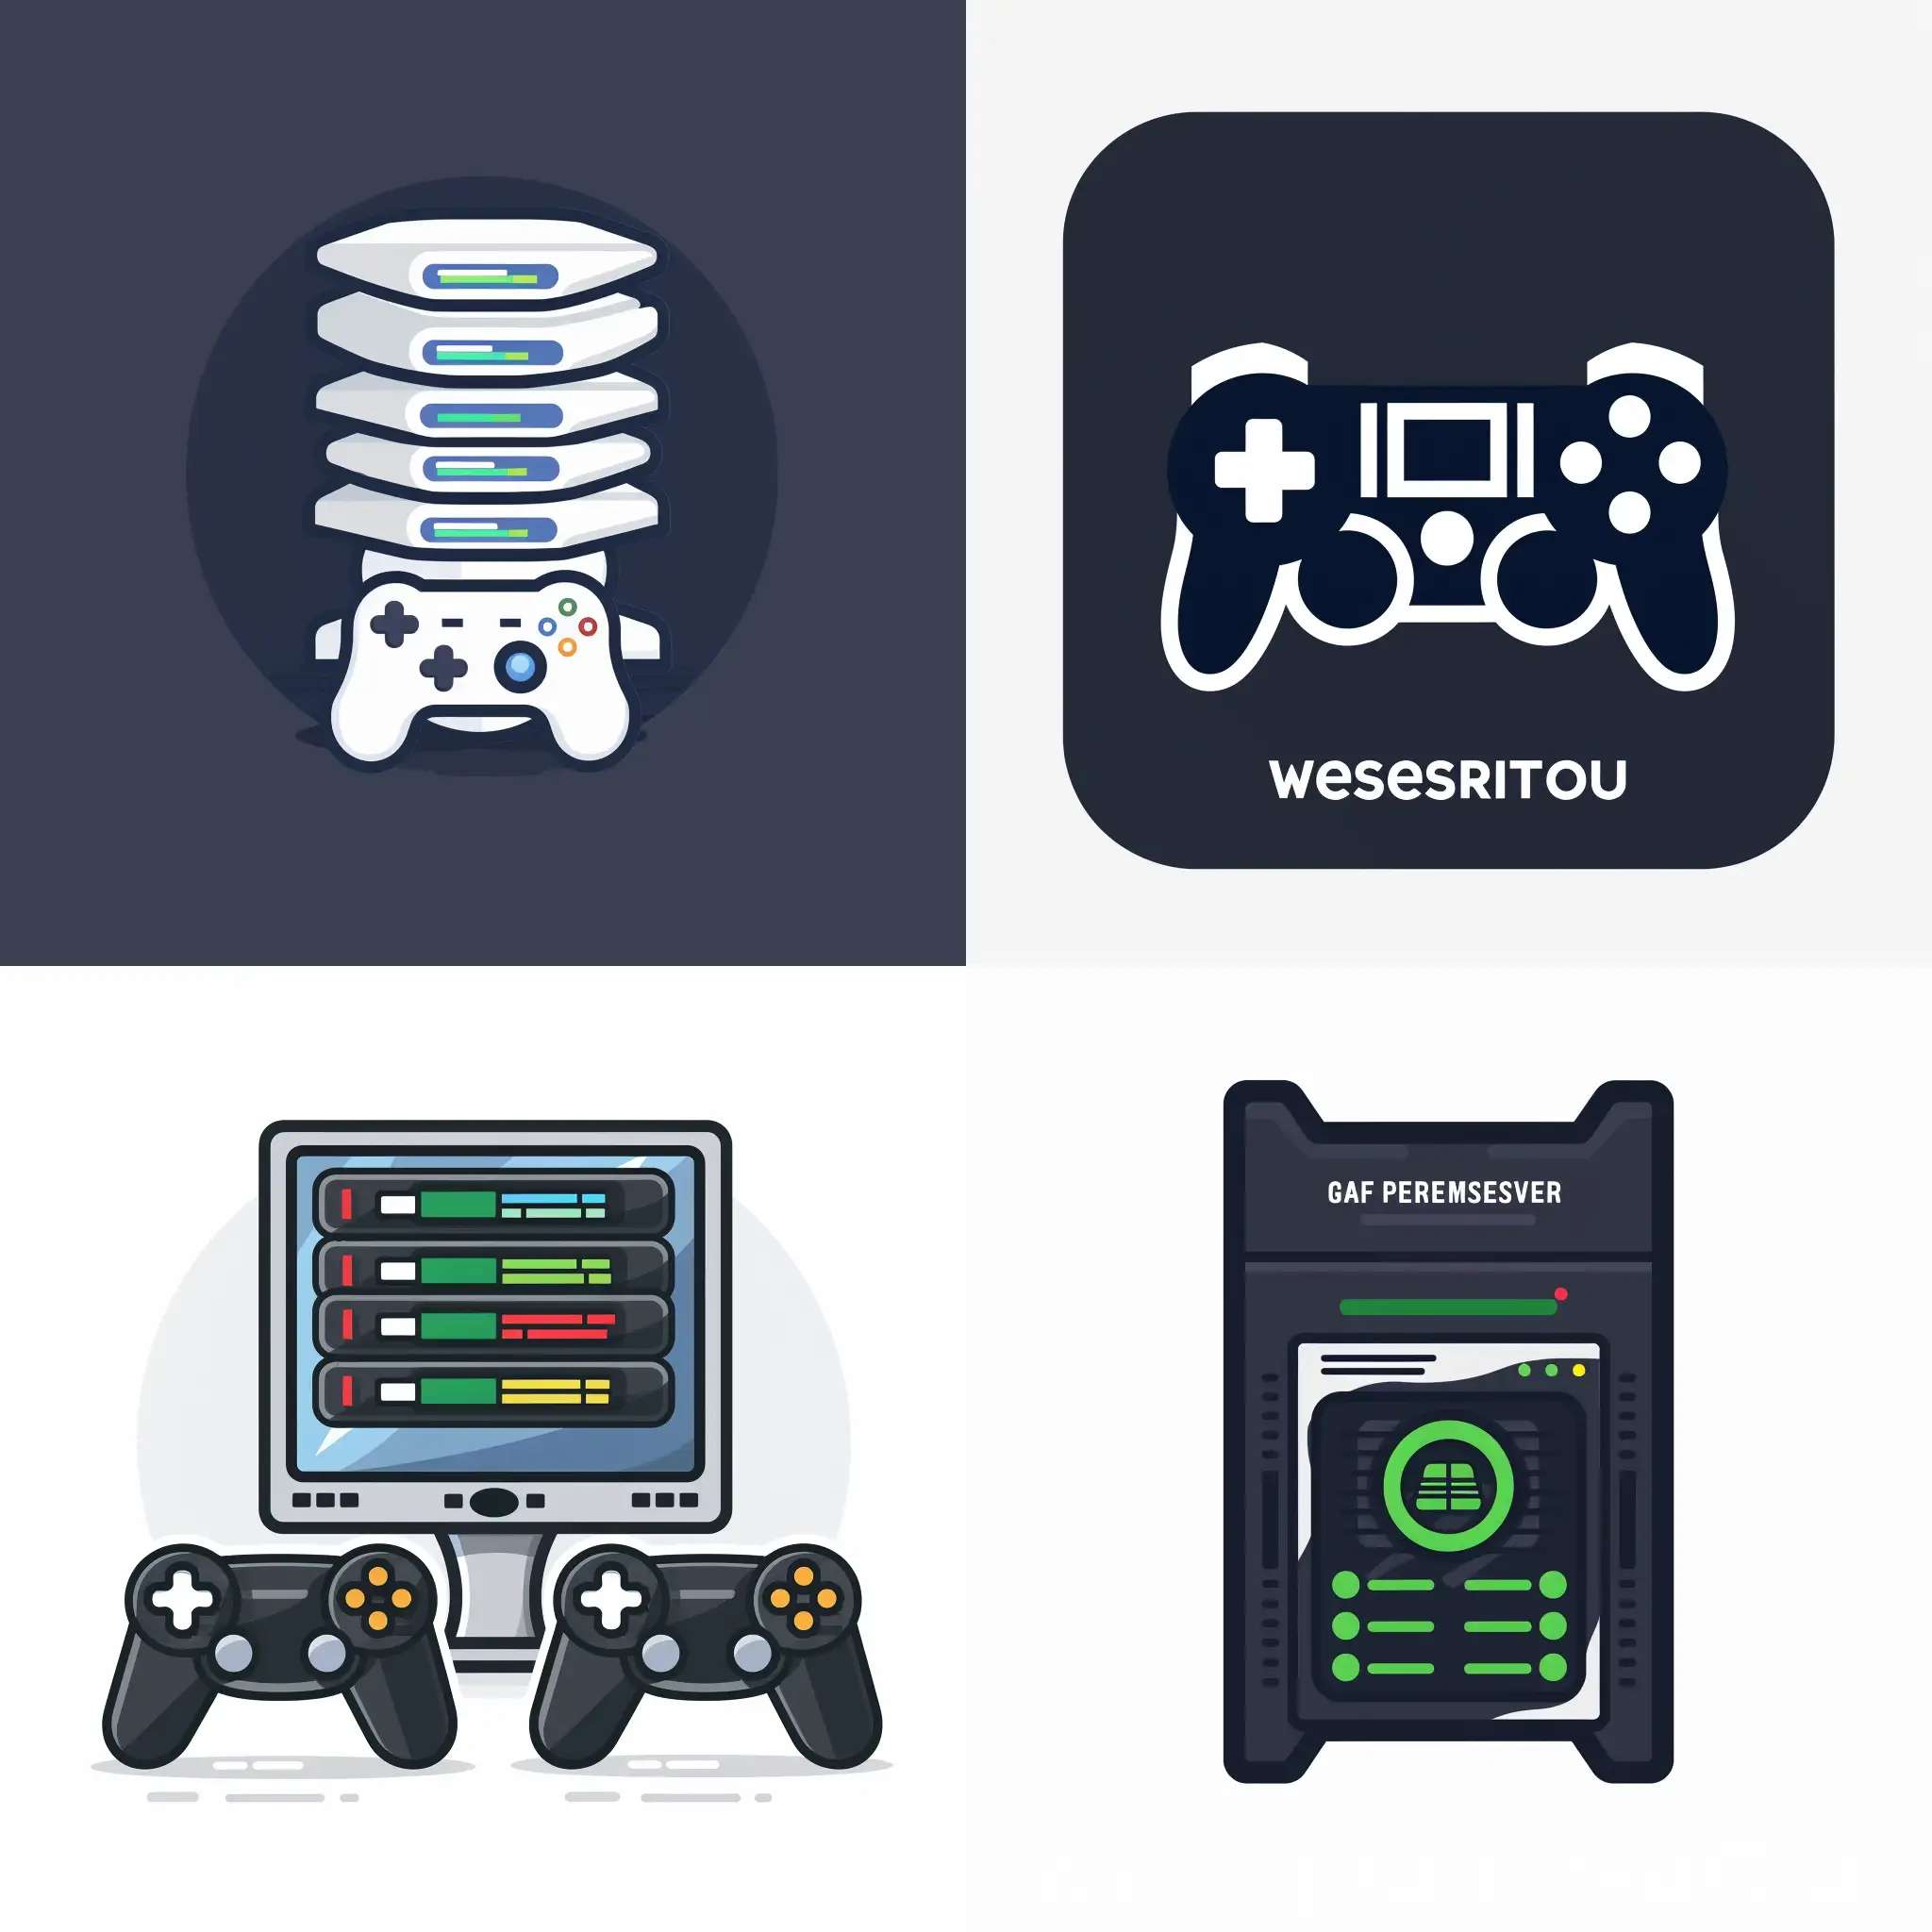 icon for game server website, which makes customers feel our professionalism and reliability, simple style, no text